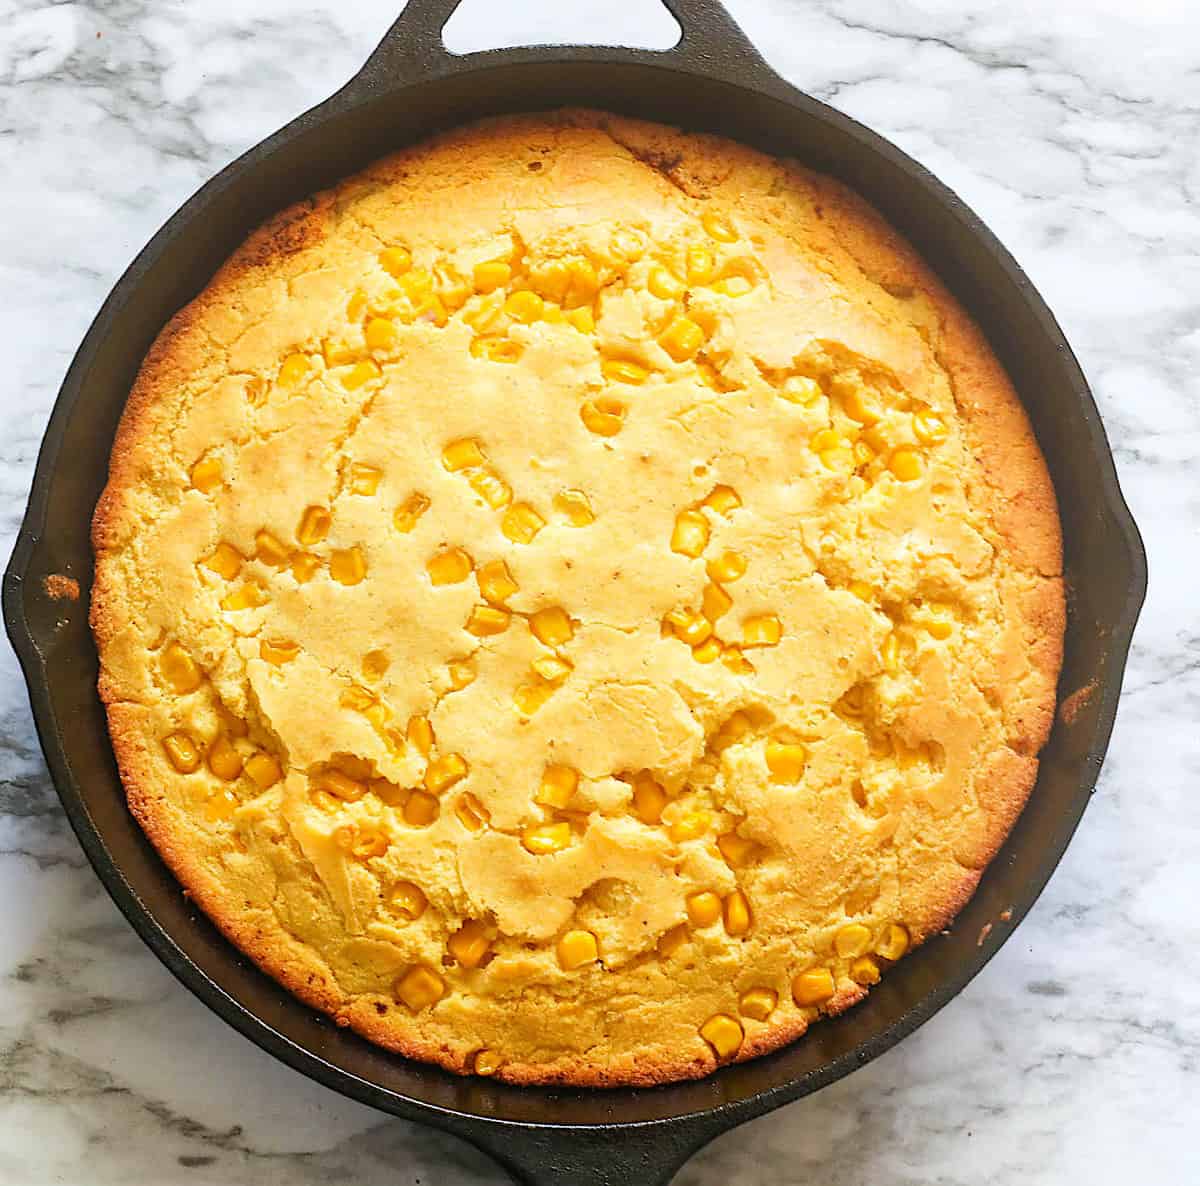 Cornbread with corn fresh from the oven and ready to devour